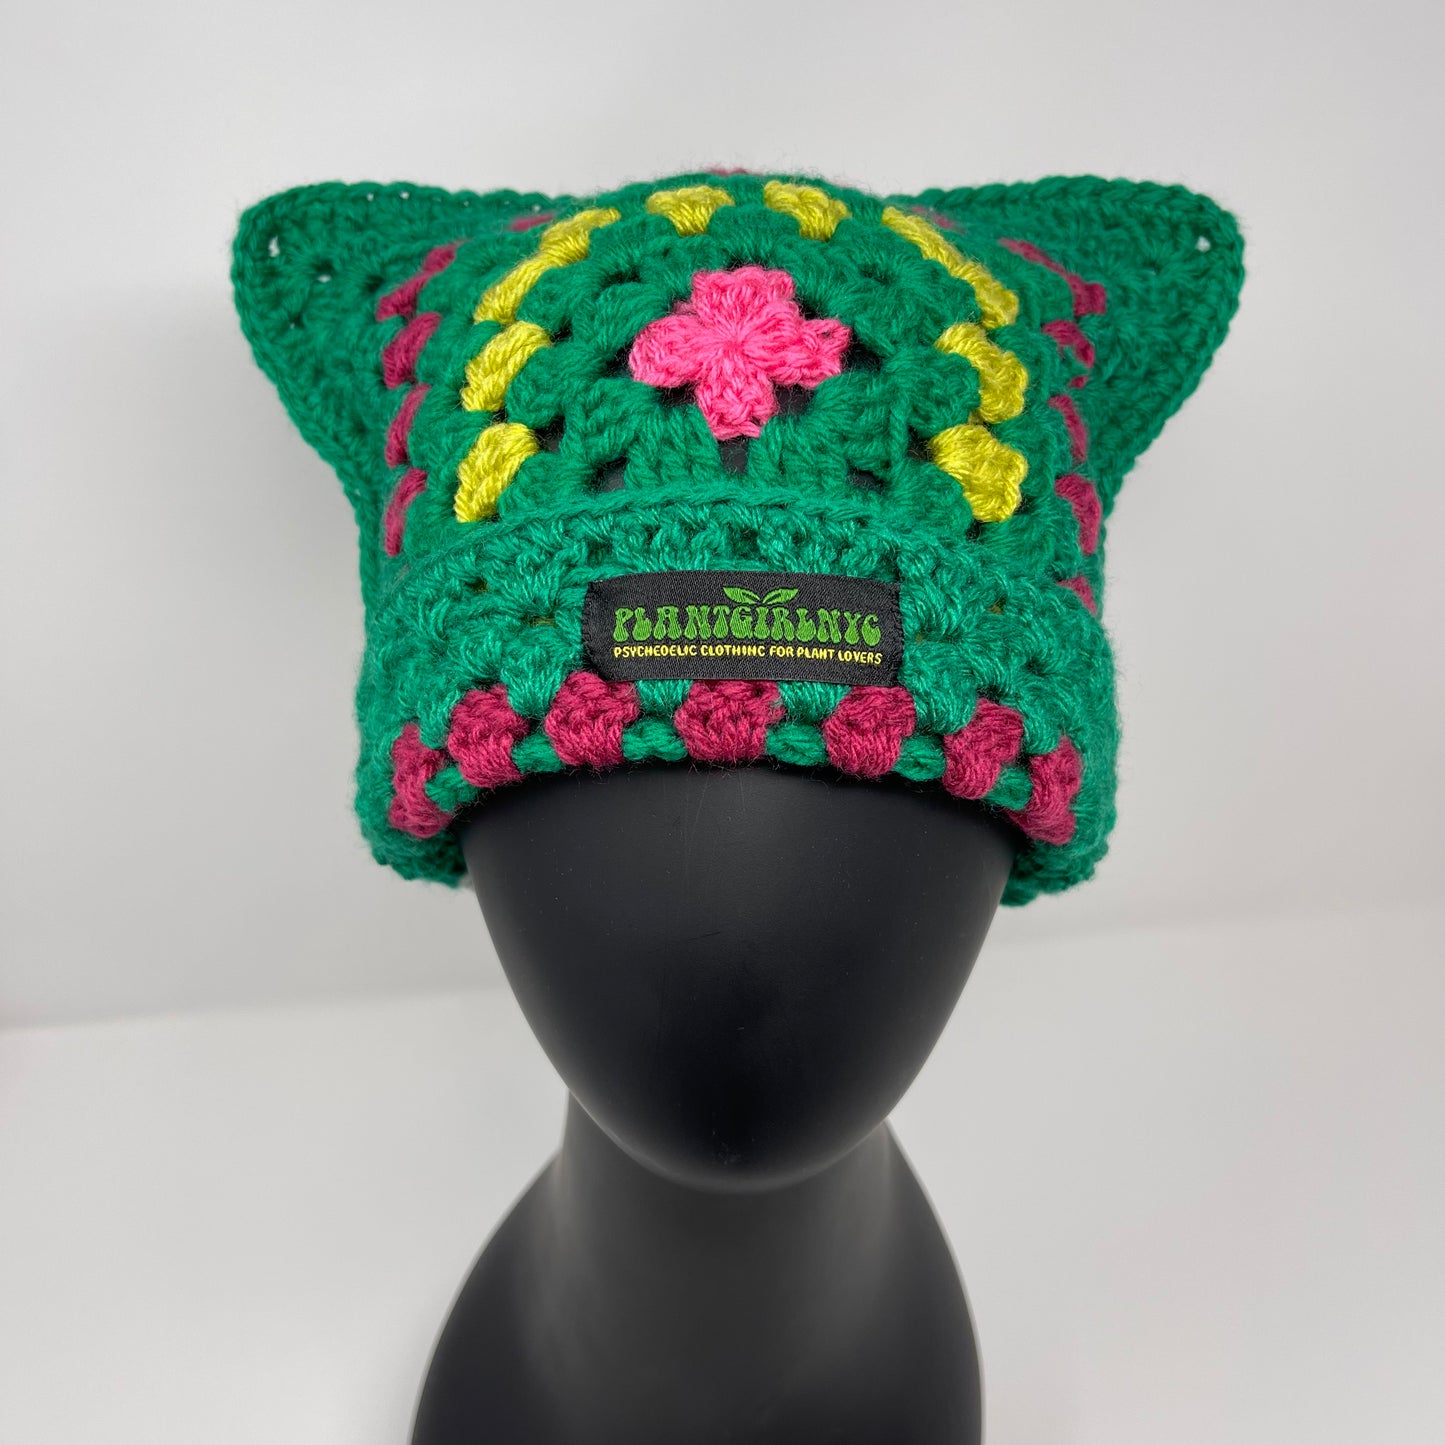 Crochet Cat Hat - Green with Accent Colors